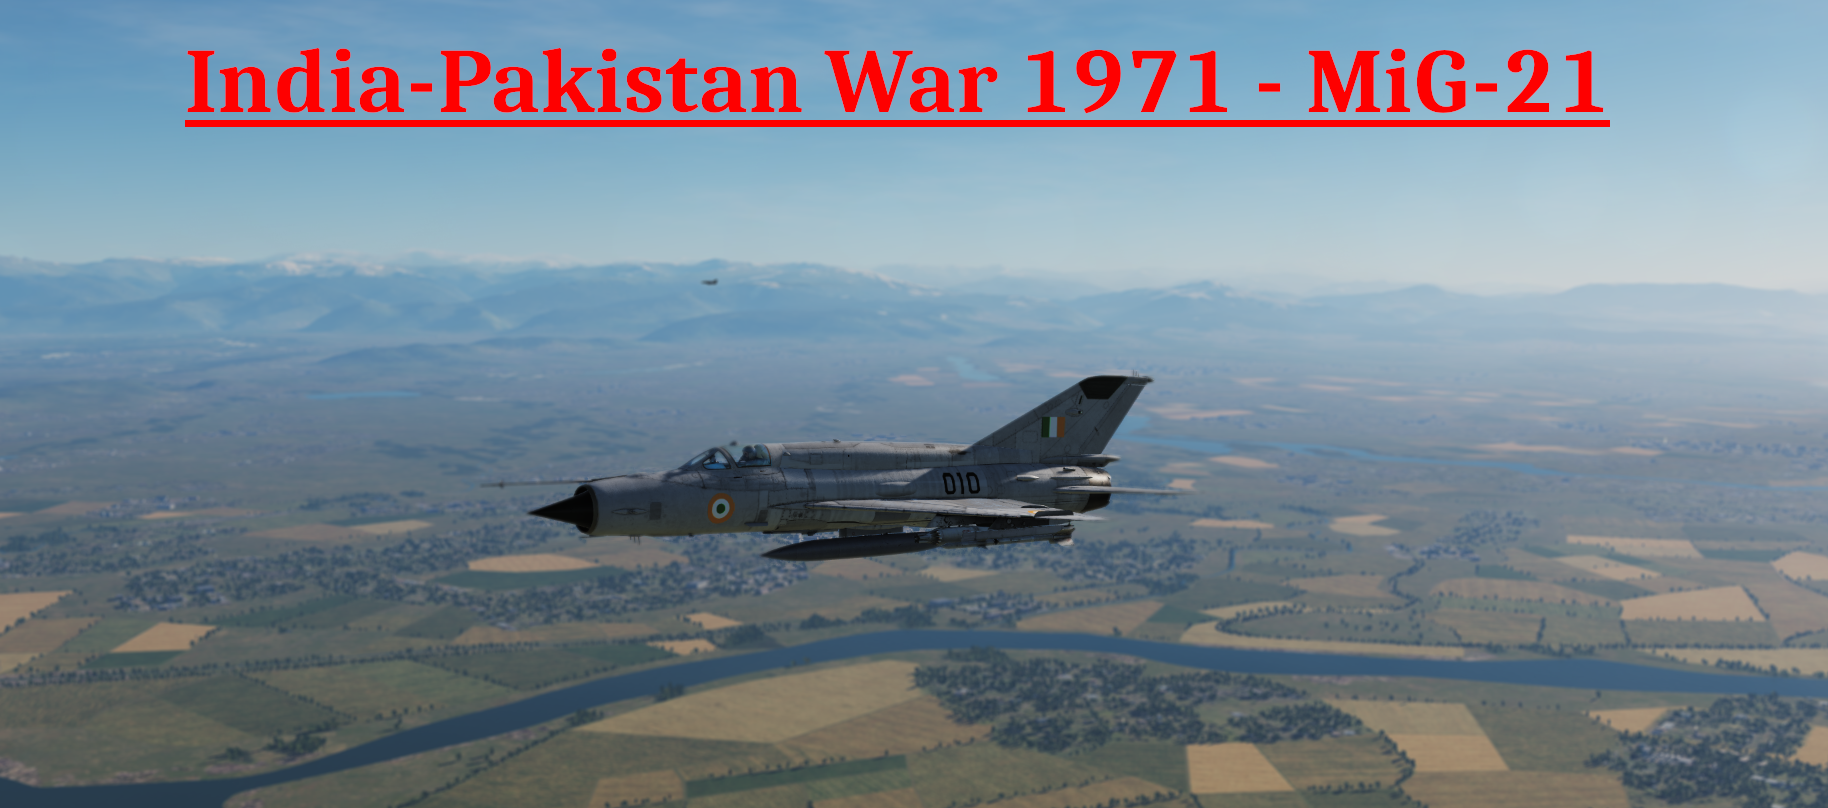 India-Pakistan War 1971 - MiG-21 Campaign using modified Mbot Dynamic Campaign Engine